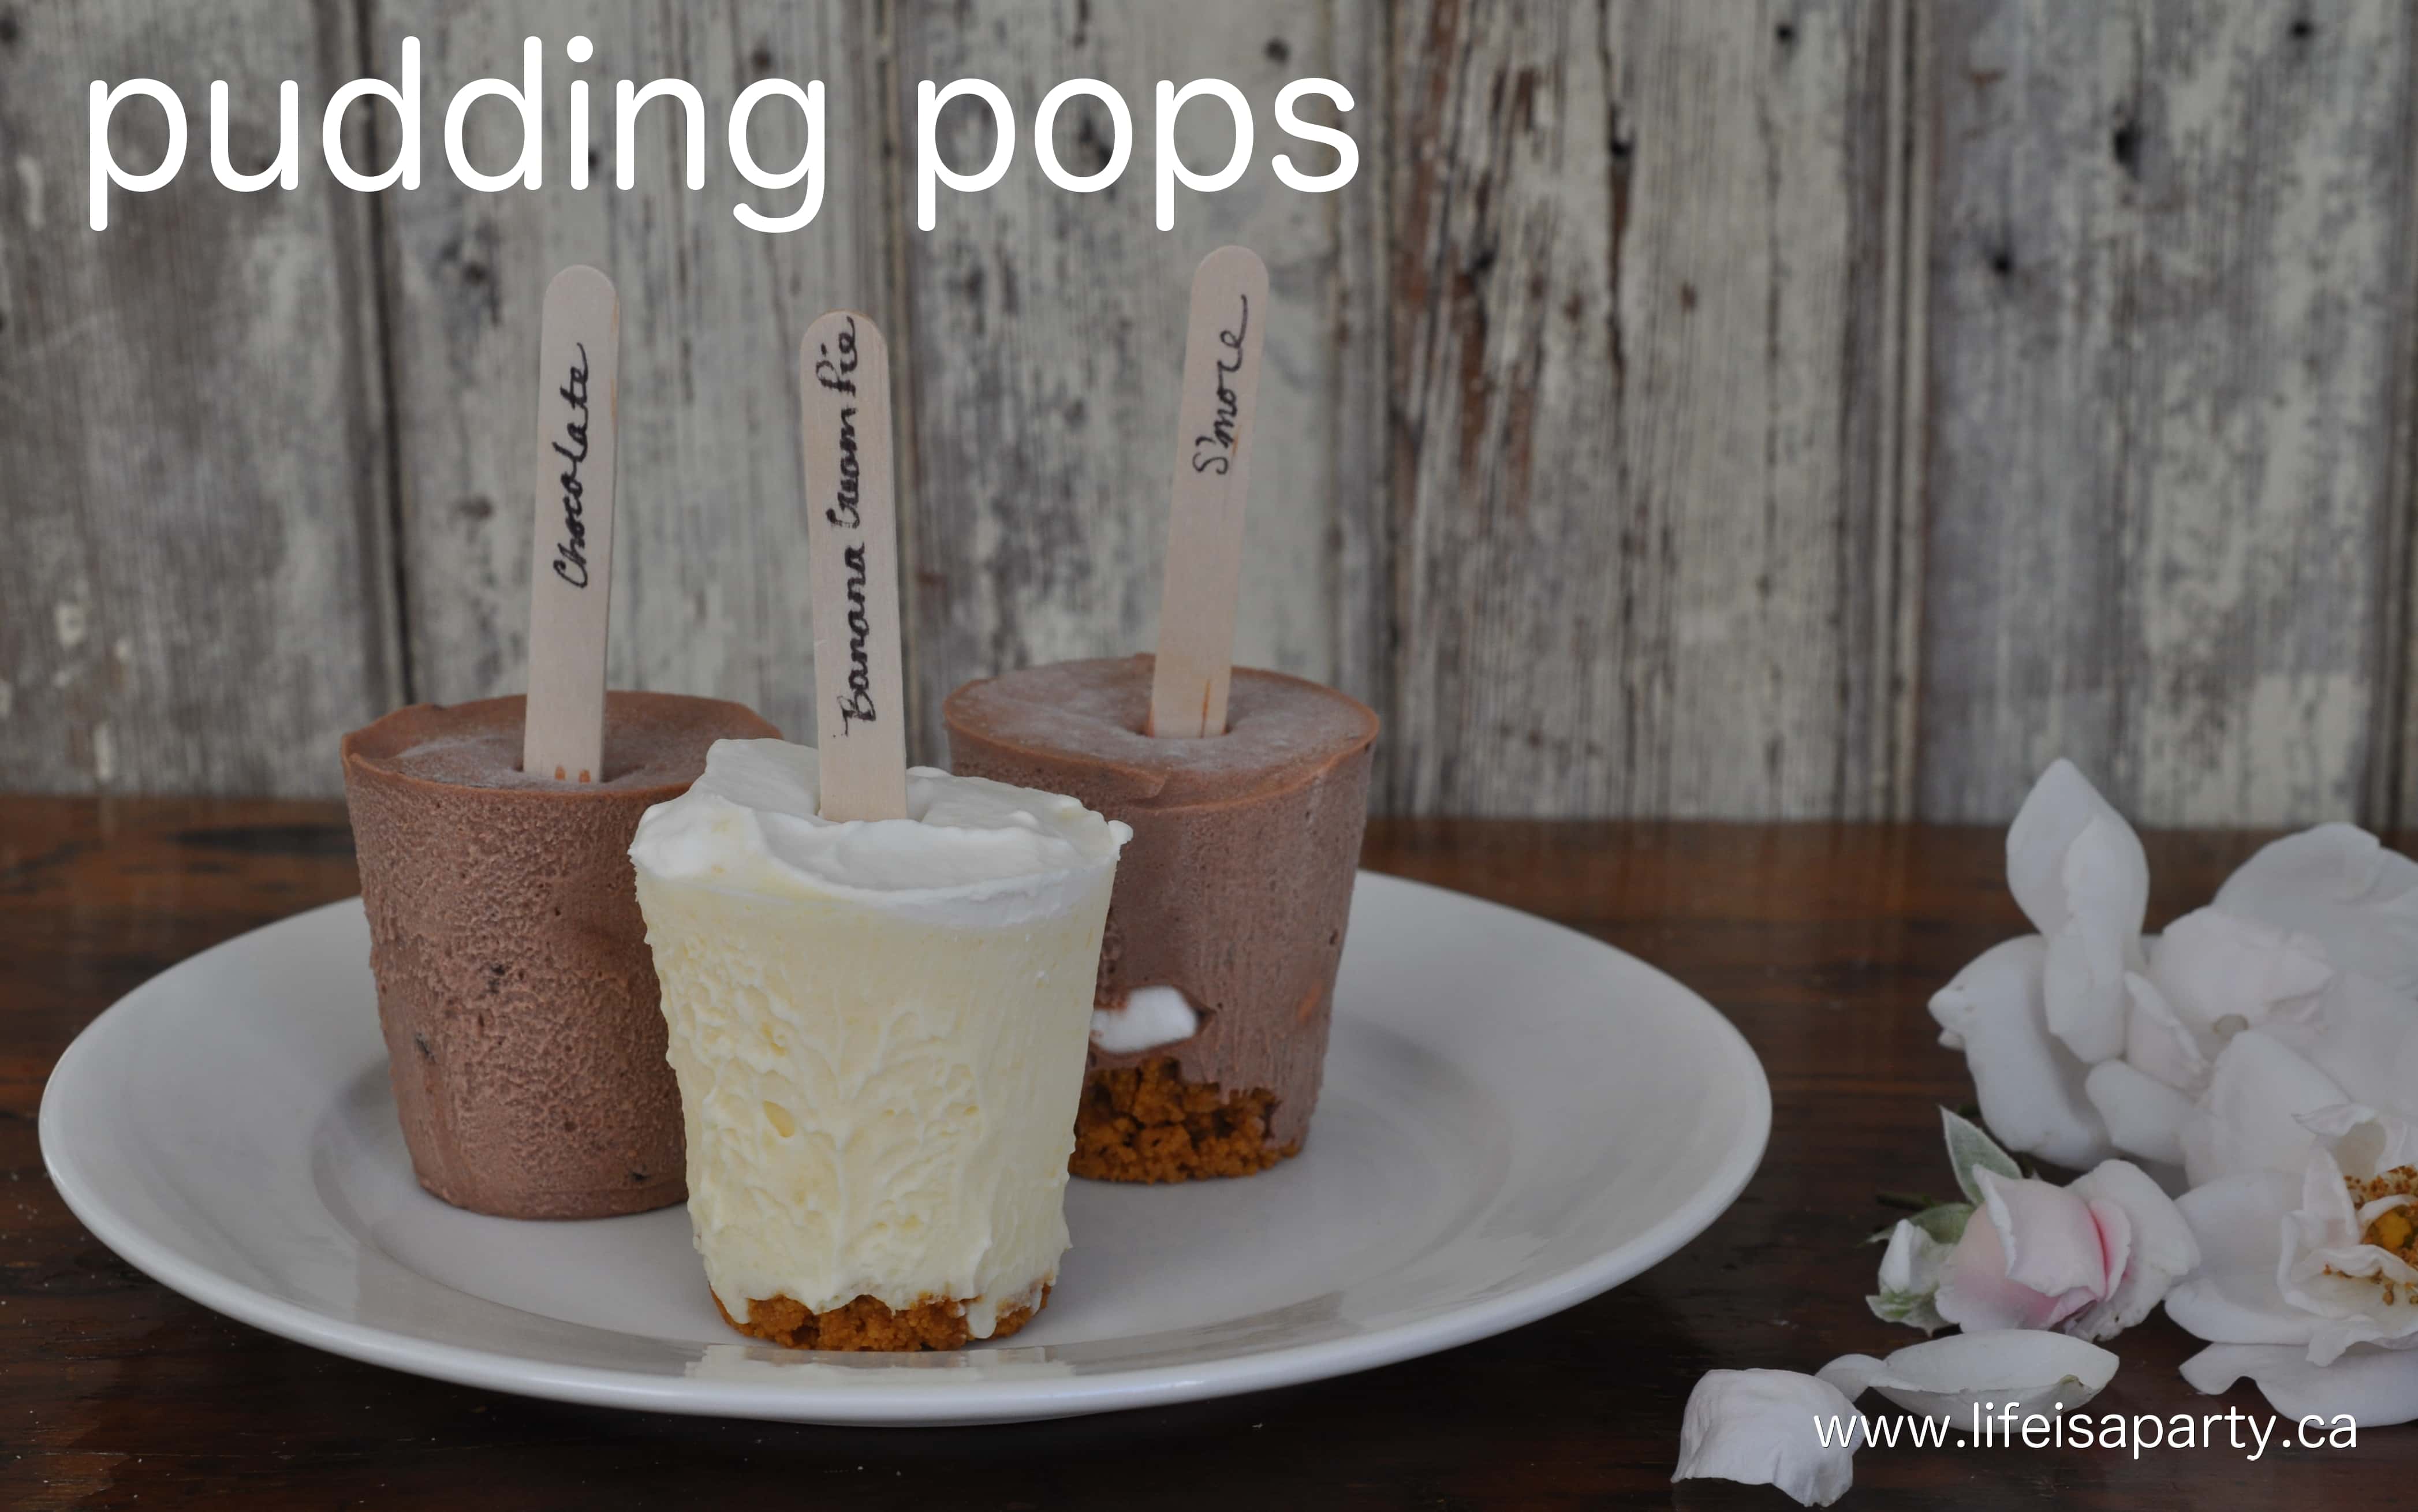 Homemade Pudding Pops: recipe for s'more, banana, and chocolate jello pudding pops. The perfect easy treat for a hot summer day.